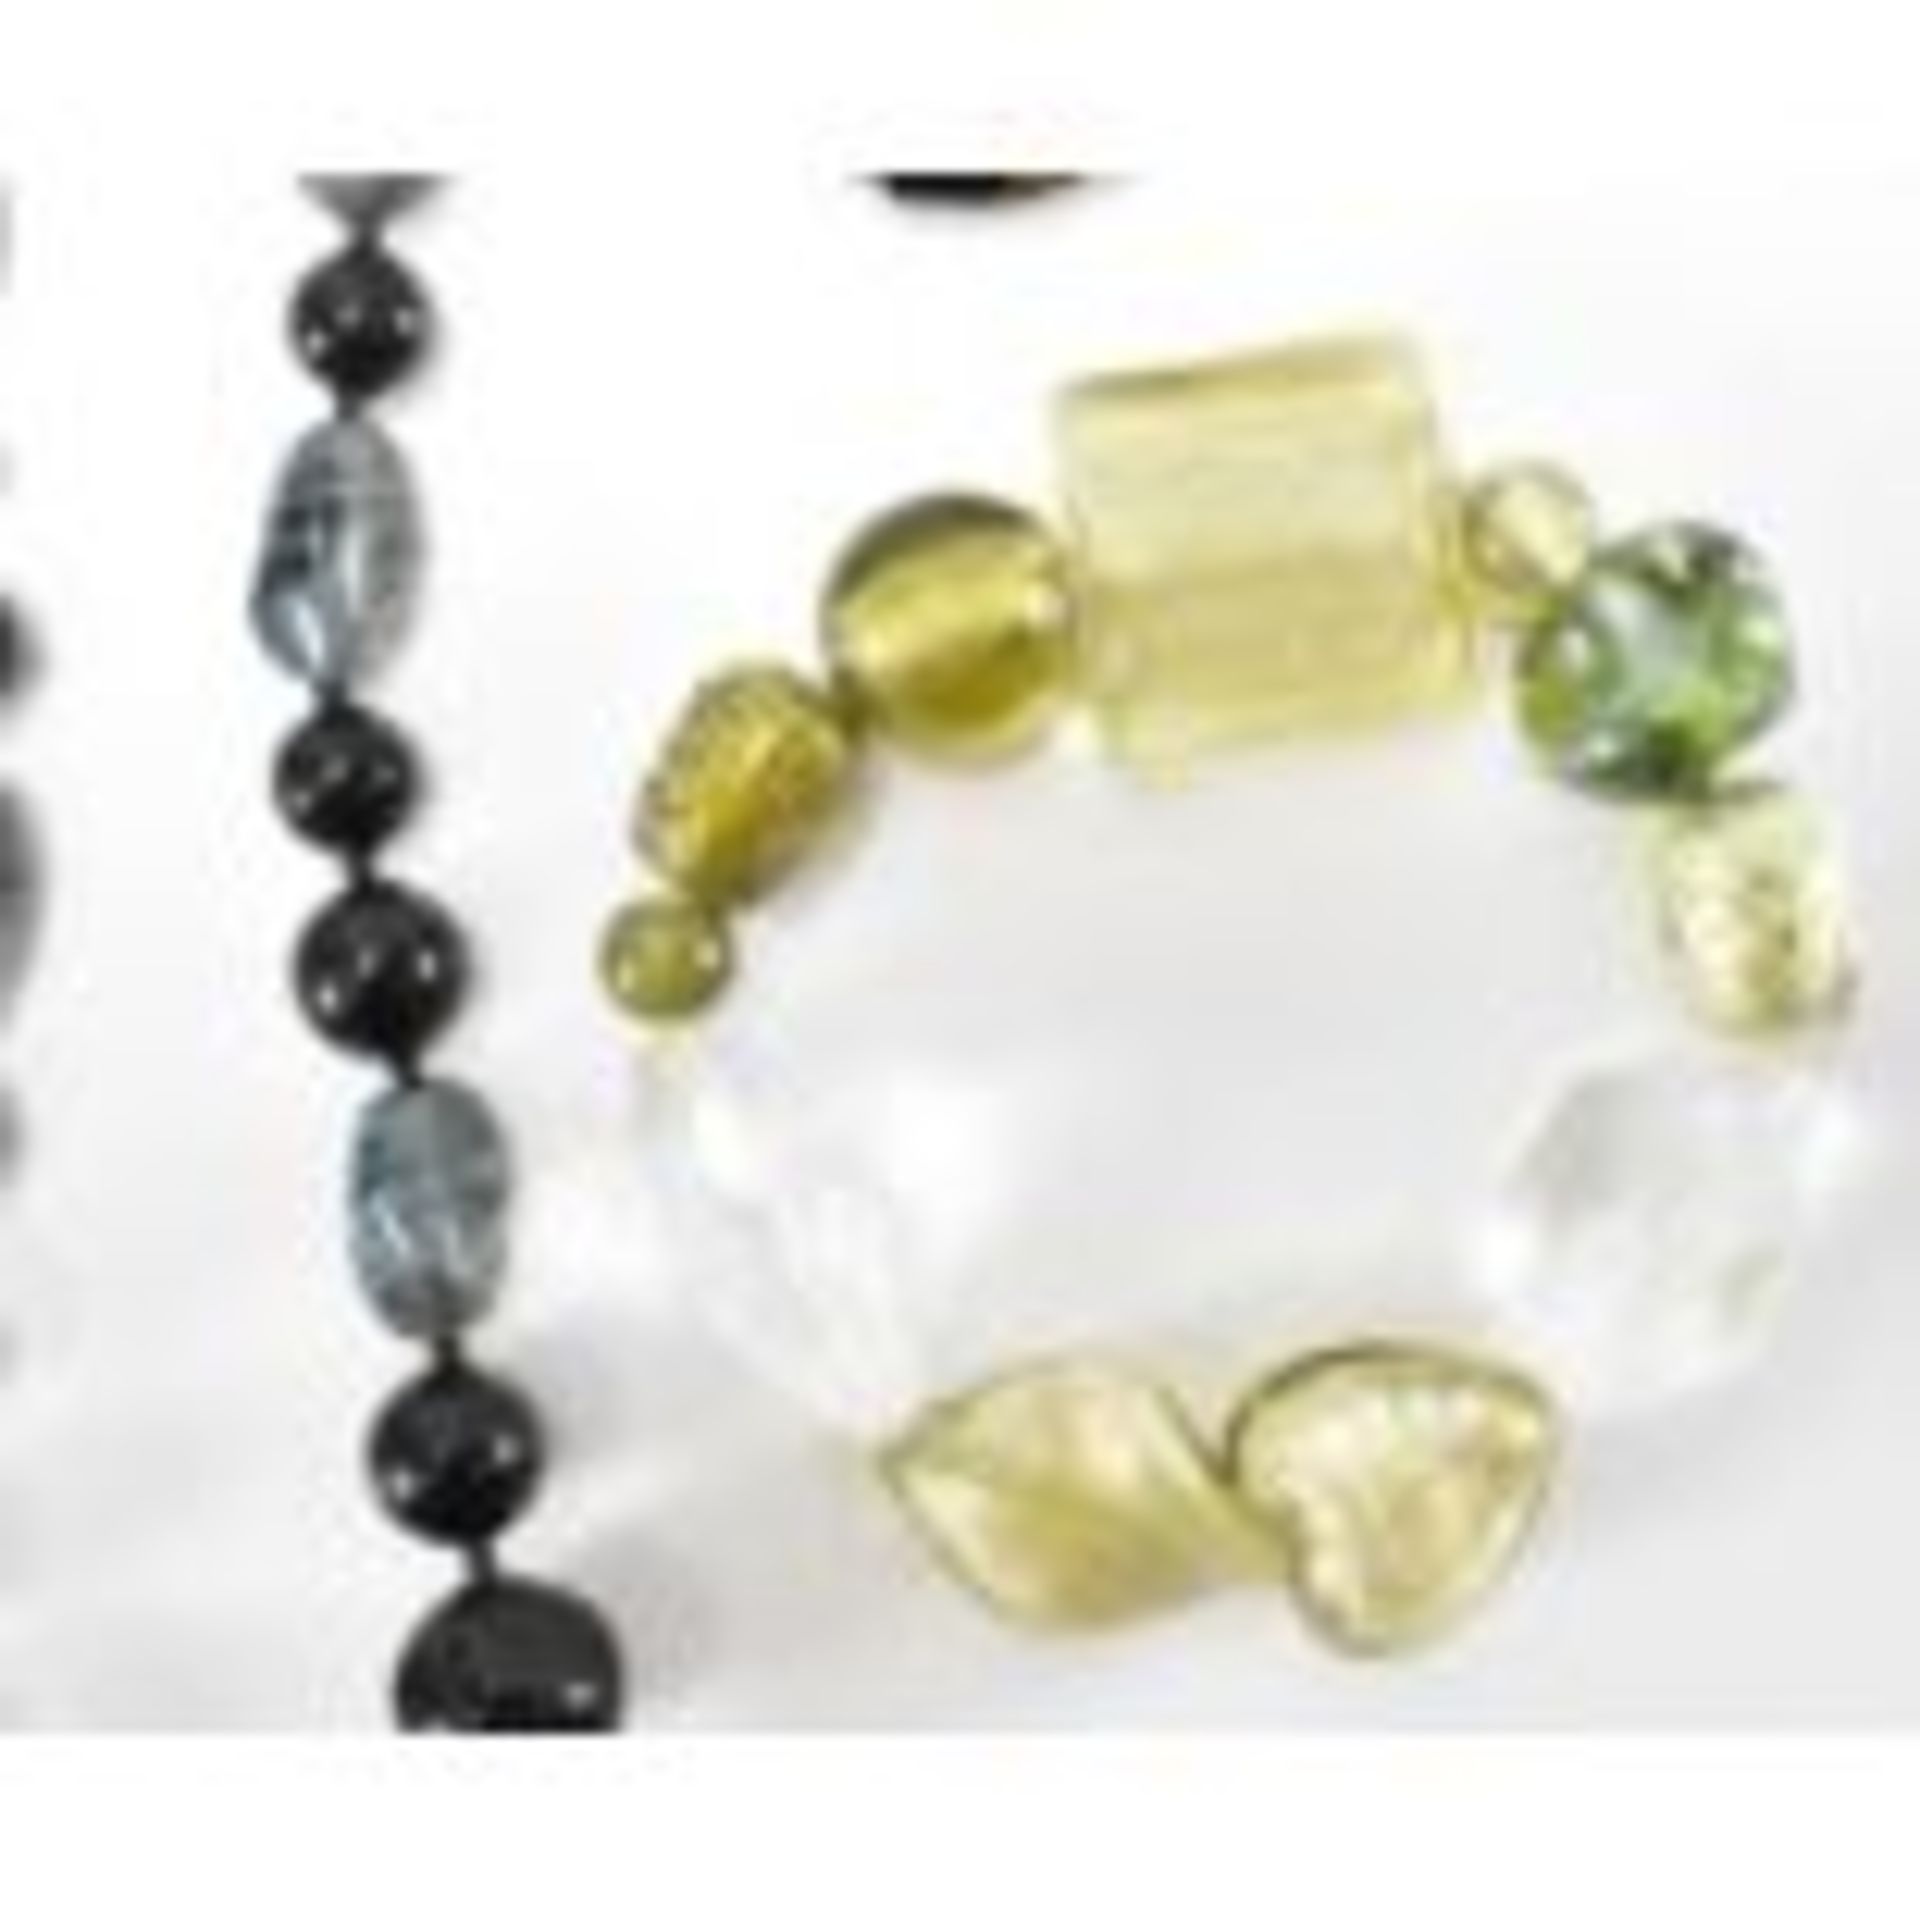 GROUP OF VINTAGE GLASS BEAD NECKLACES - Image 4 of 7